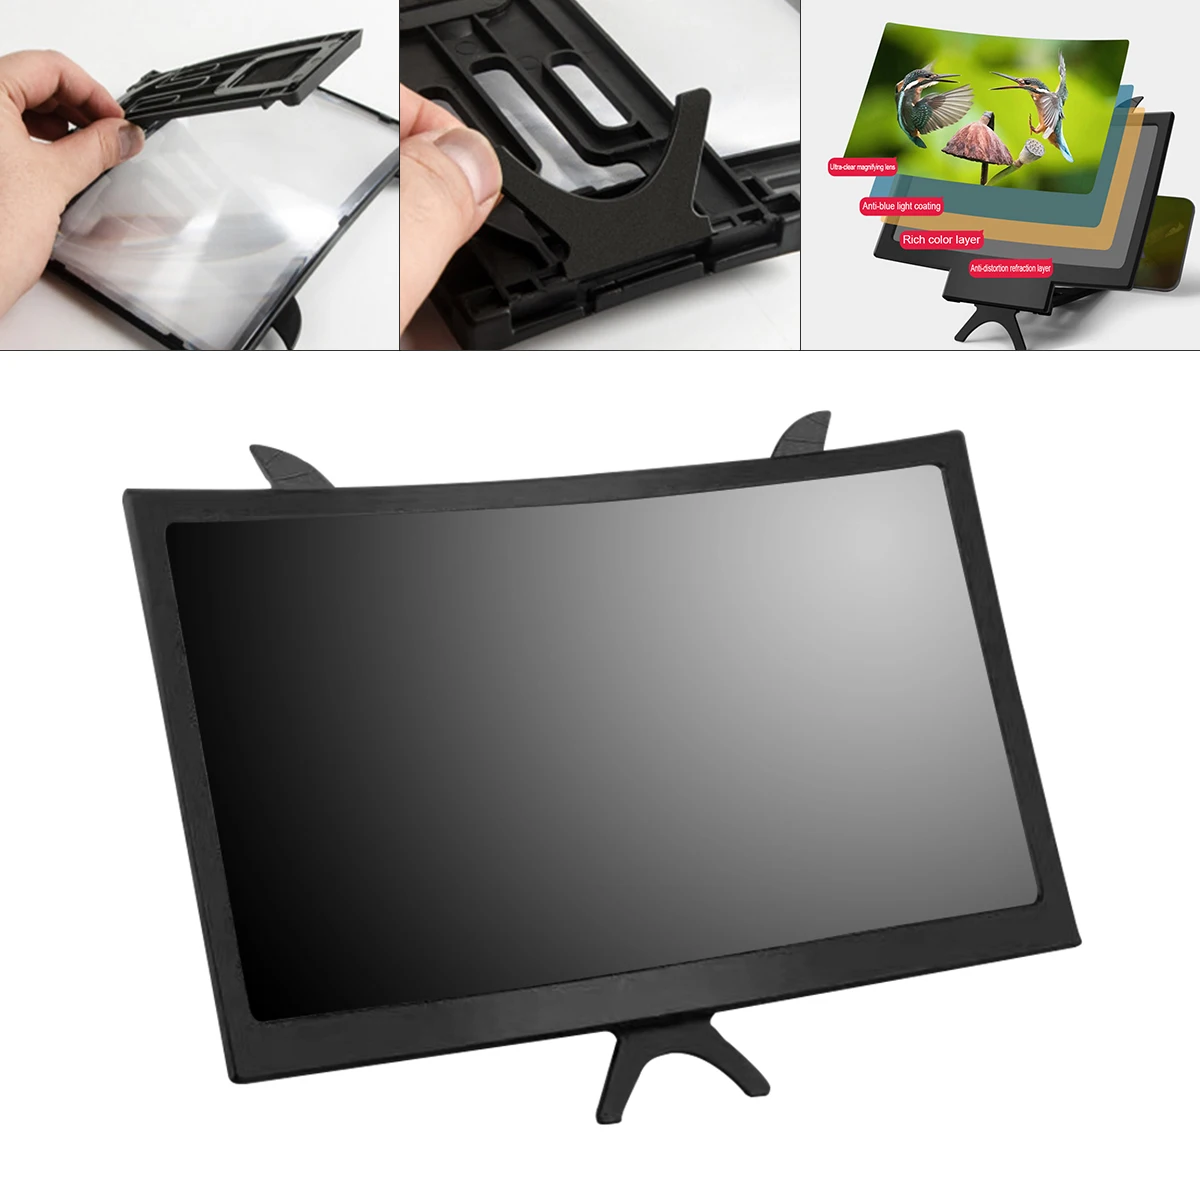 

12 Inch Foldable HD Stand Enlarged Screen Mobile Phone Magnifier Projection Phone Cinema Glass Magnifier Folding Amplifier